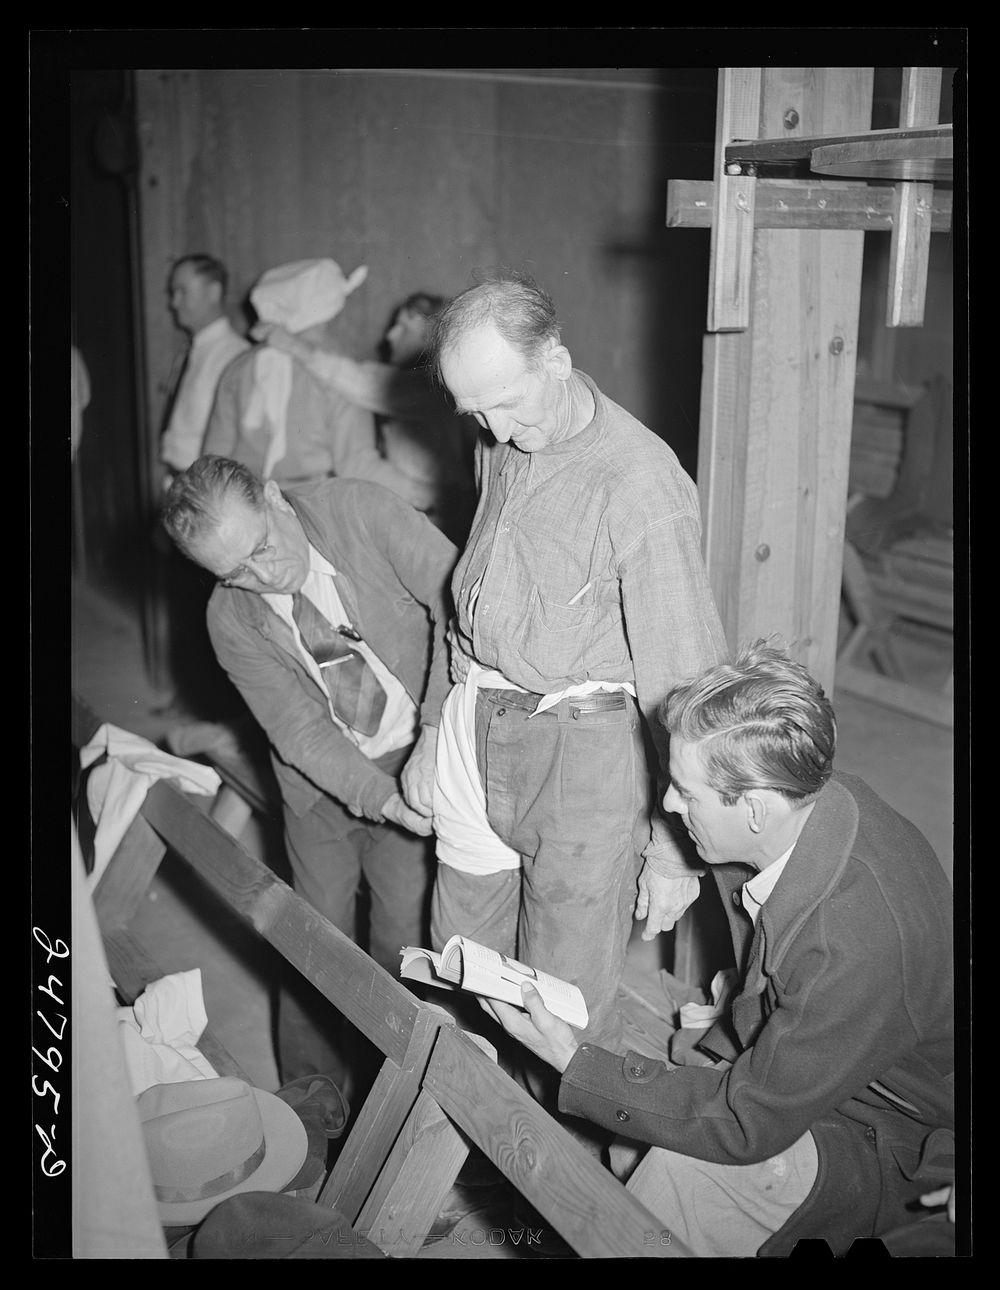 First aid class at community center. Robstown, Texas. Sourced from the Library of Congress.